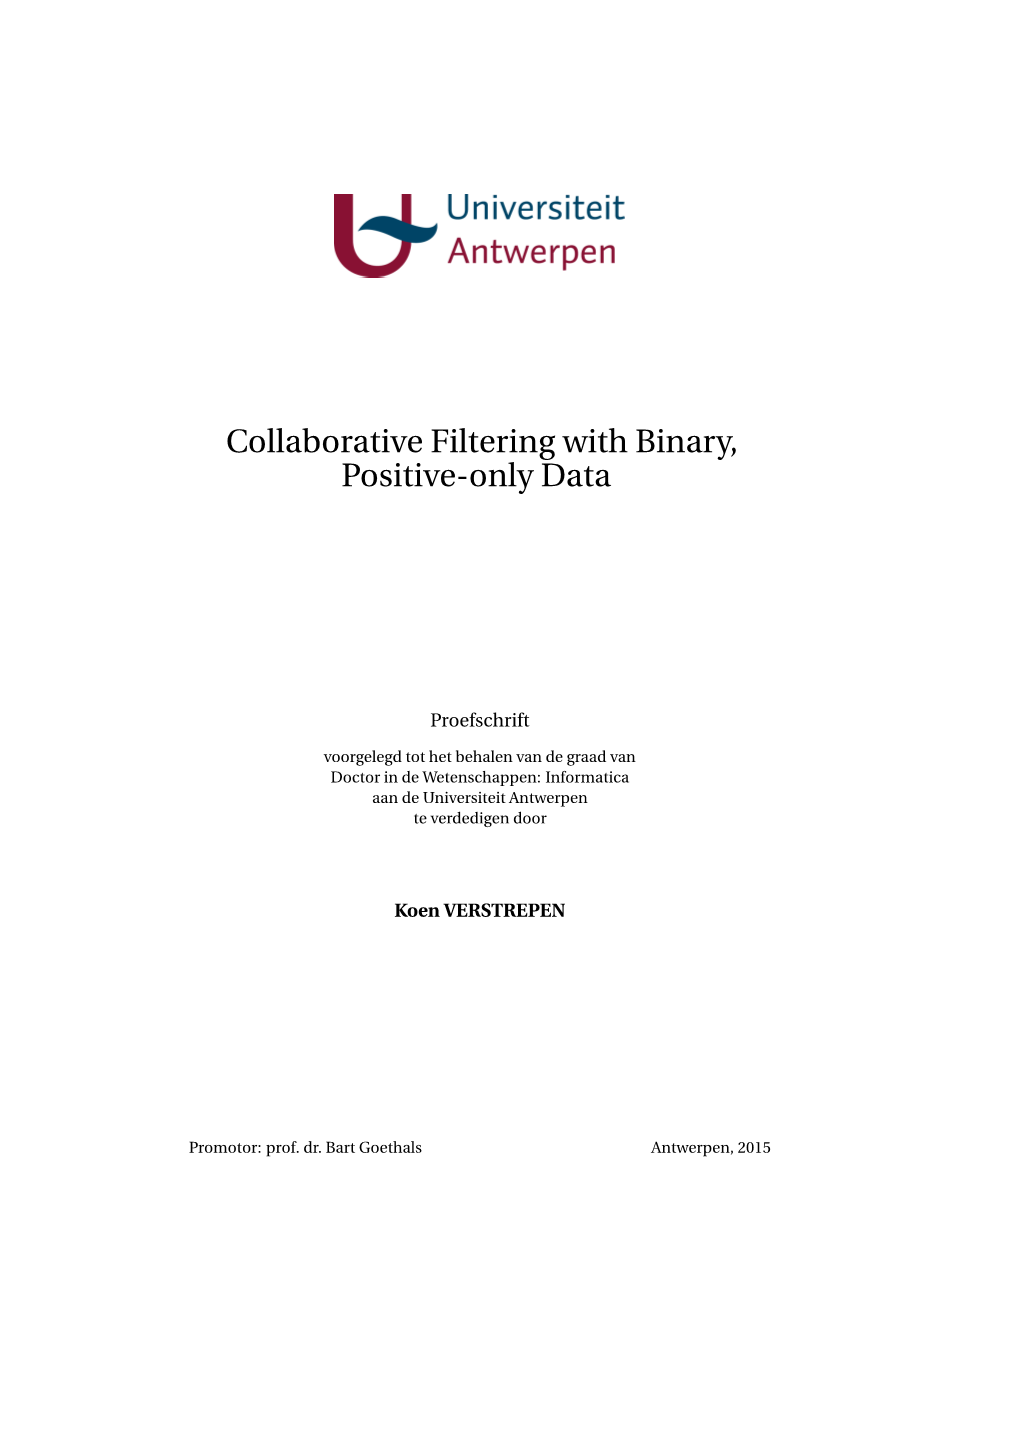 Collaborative Filtering with Binary, Positive-Only Data